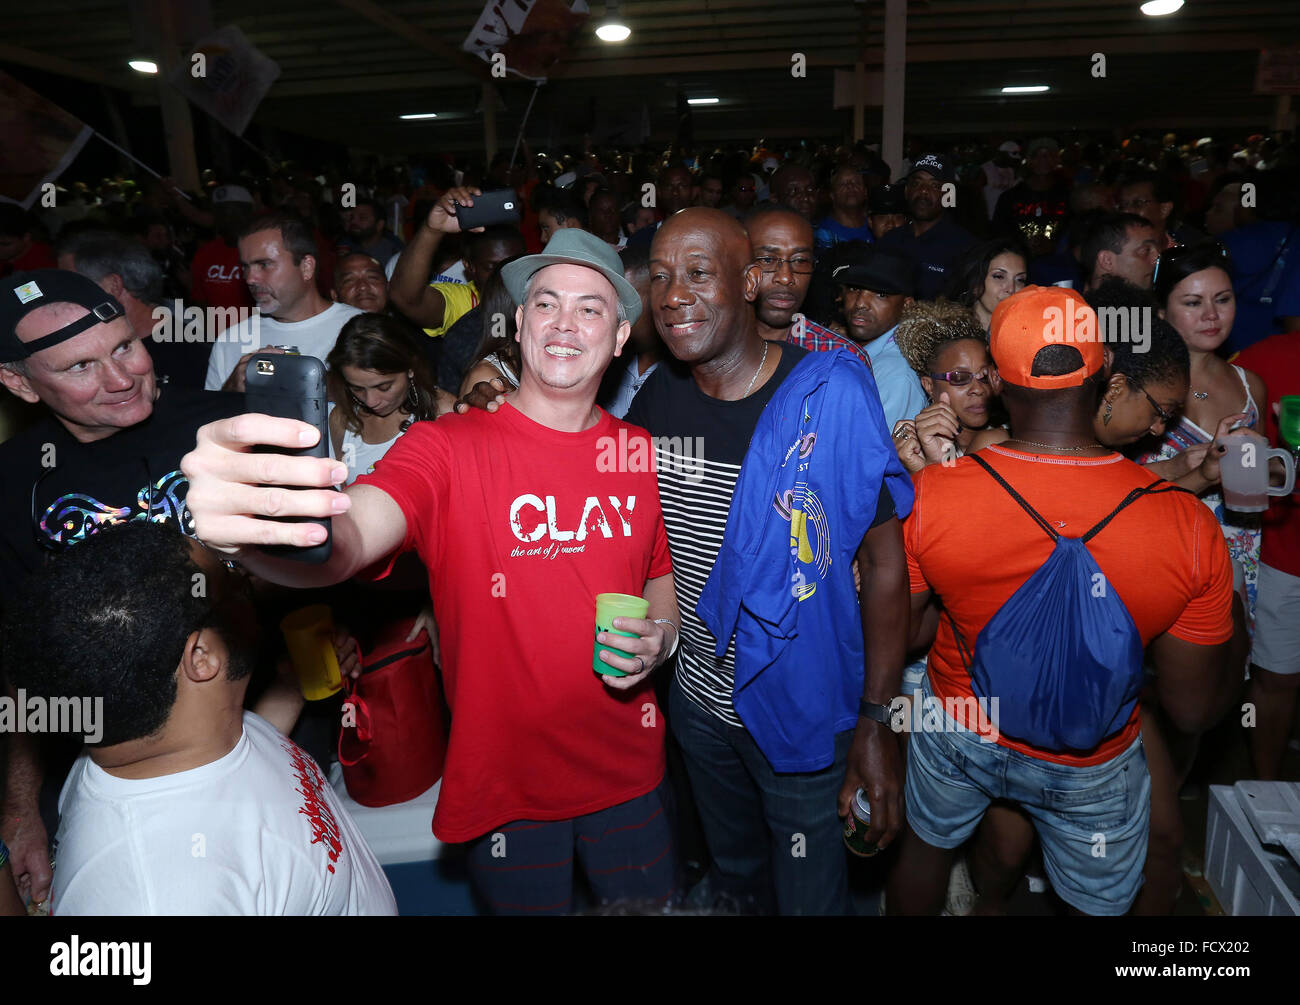 Port of Spain, Trinidad. 24th January, 2016. Keith Christopher Rowley (C), Prime Minister of Trinidad & Tobago, poses for selfies in the North Stand at the semi-finals of Panorama in the Queen's Park Savannah during Carnival in Port of Spain, Trinidad on Sunday January 24, 2016. (Photo by Sean Drakes/Alamy Live News) Stock Photo